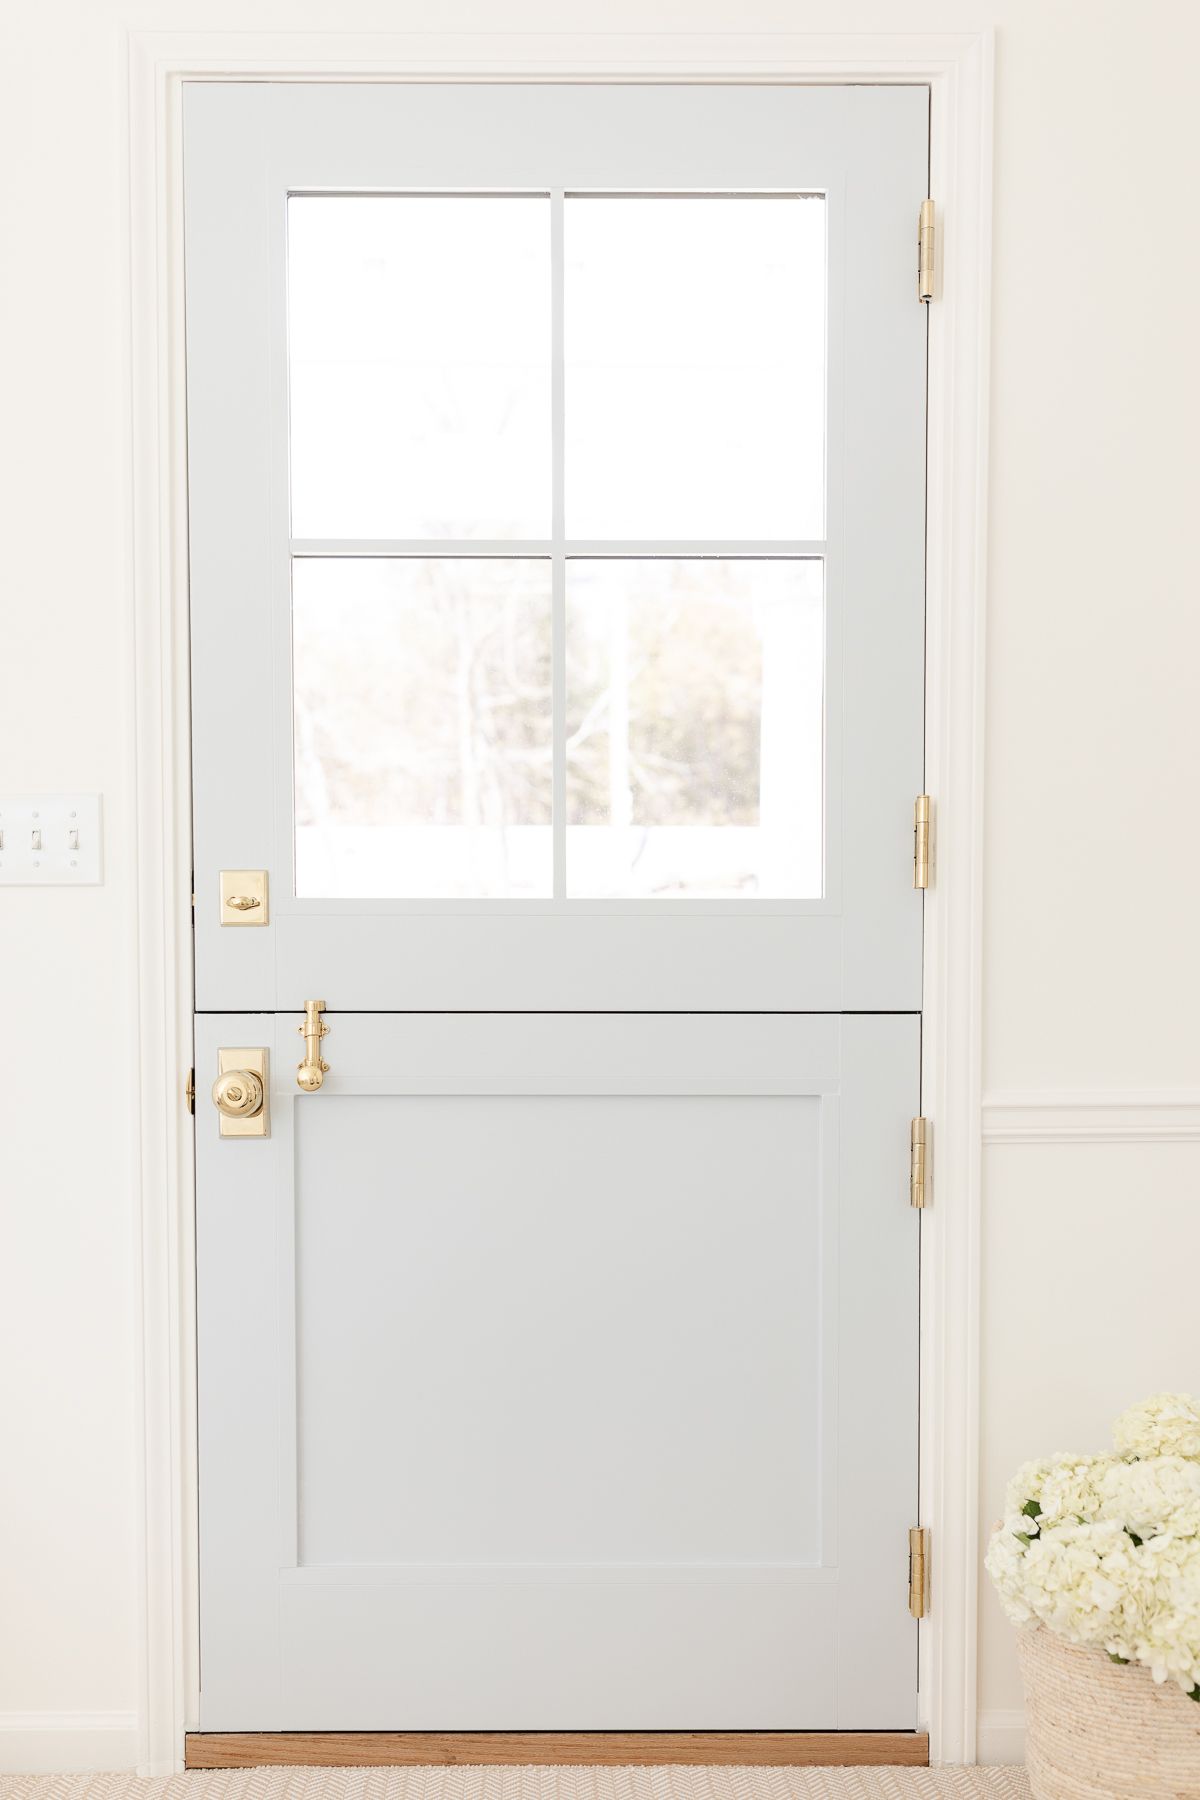 A blue Dutch door with four glass panes on top, looking from the inside out, with brass Dutch door hardware